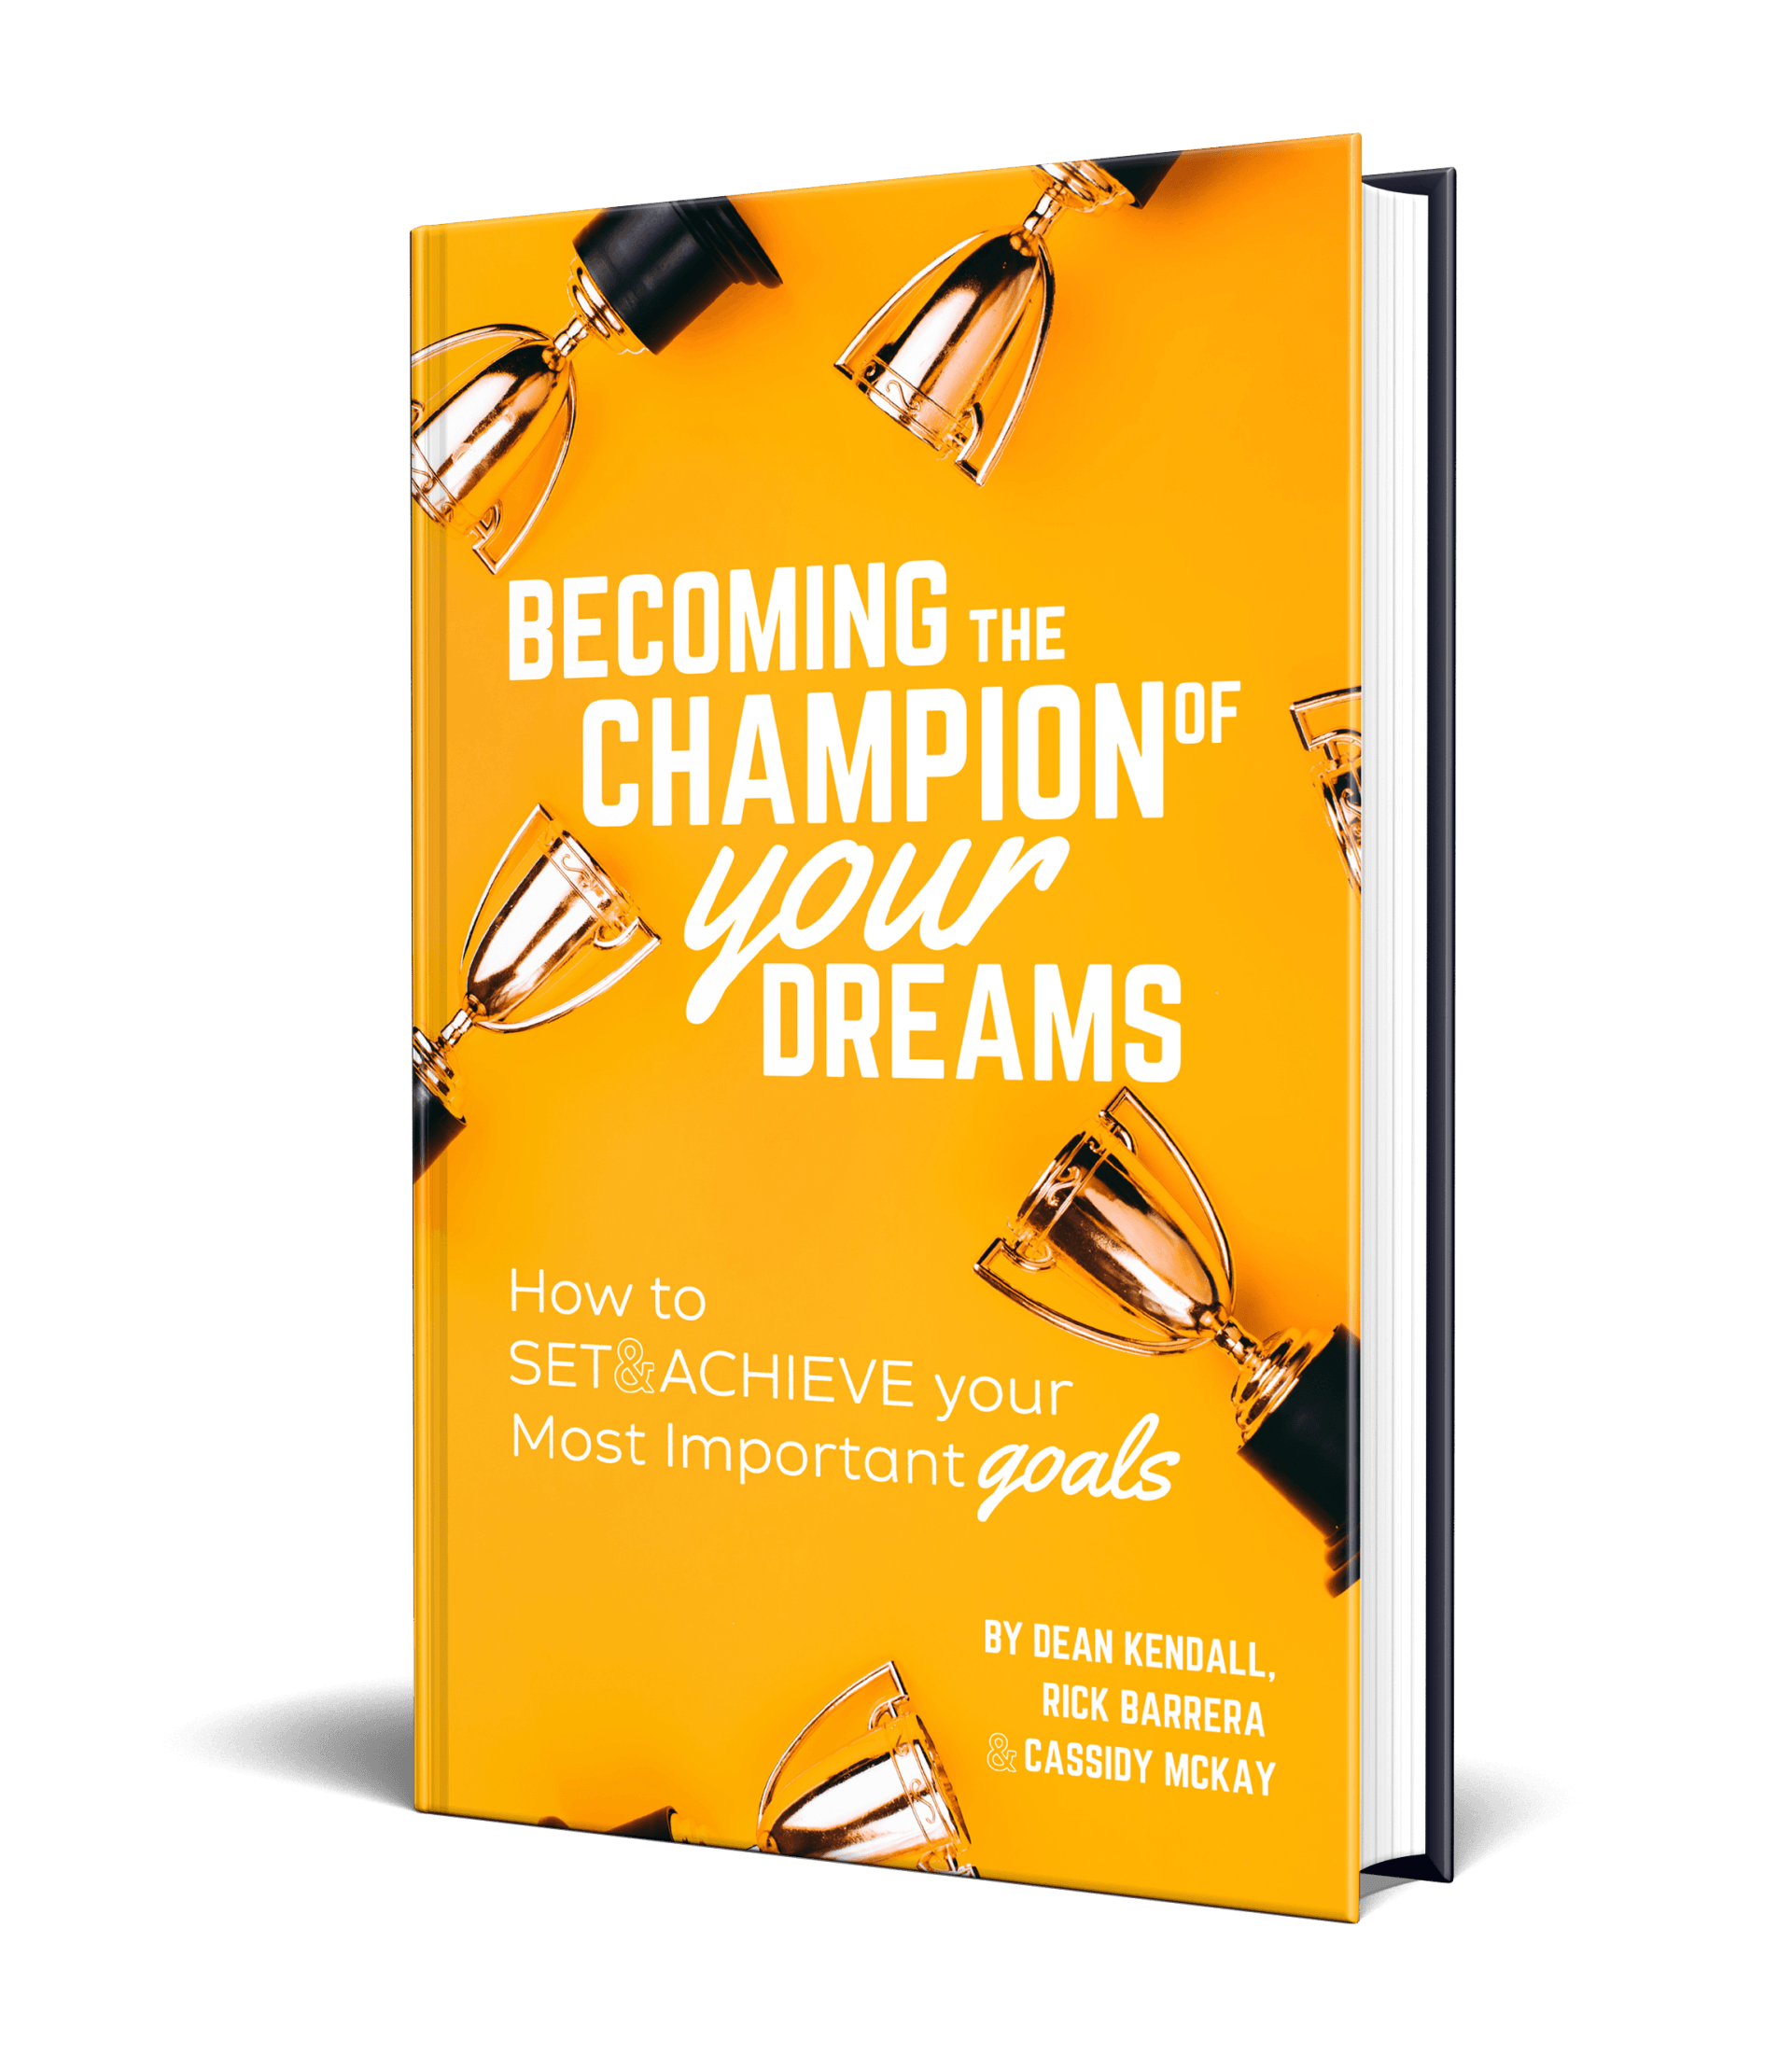 Becoming the Champion of your Dreams